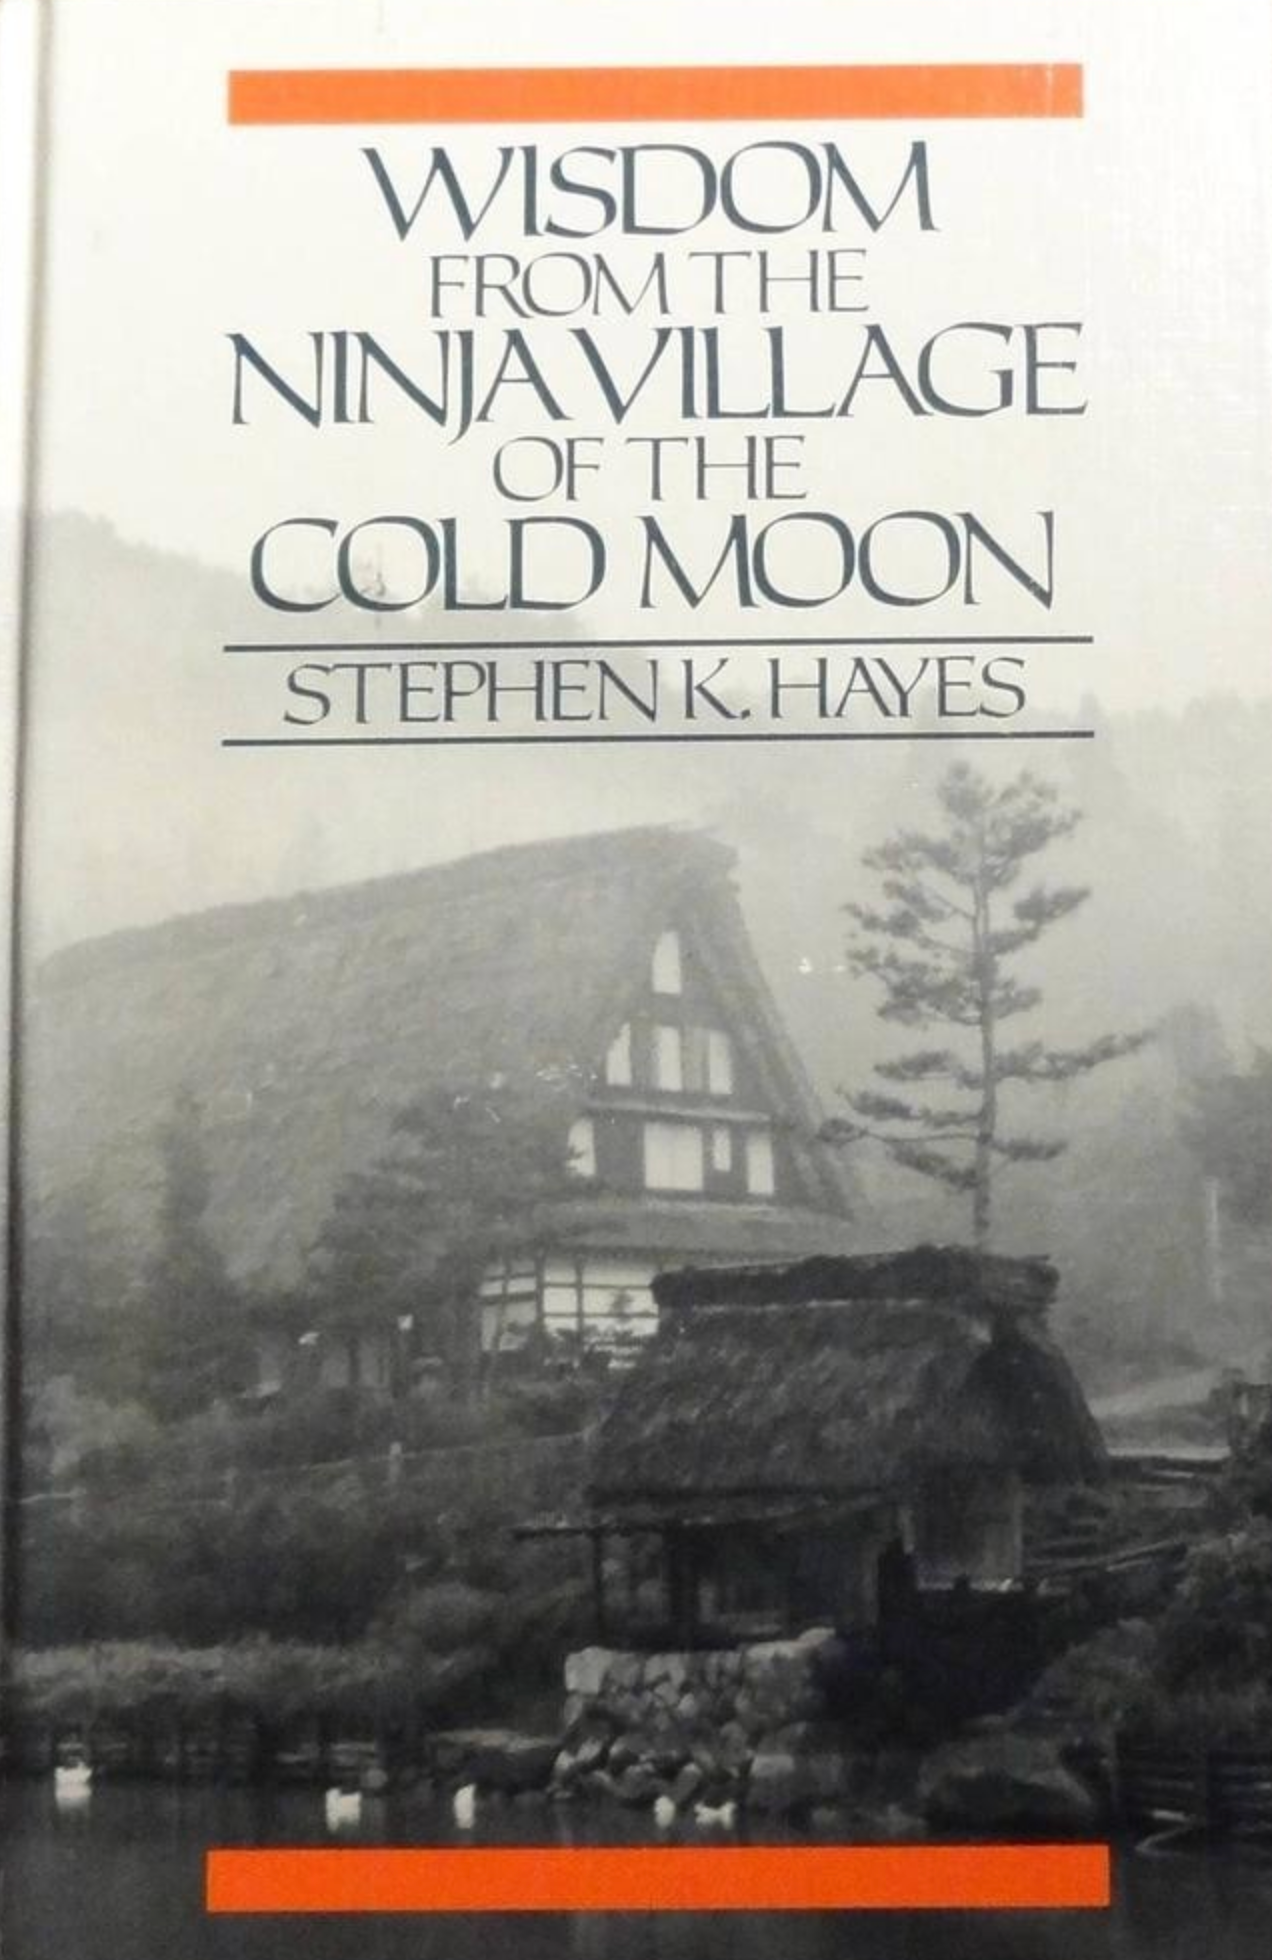 Wisdom from the Ninja Village of the Cold Moon by Stephen Hayes (Preowned) - Budovideos